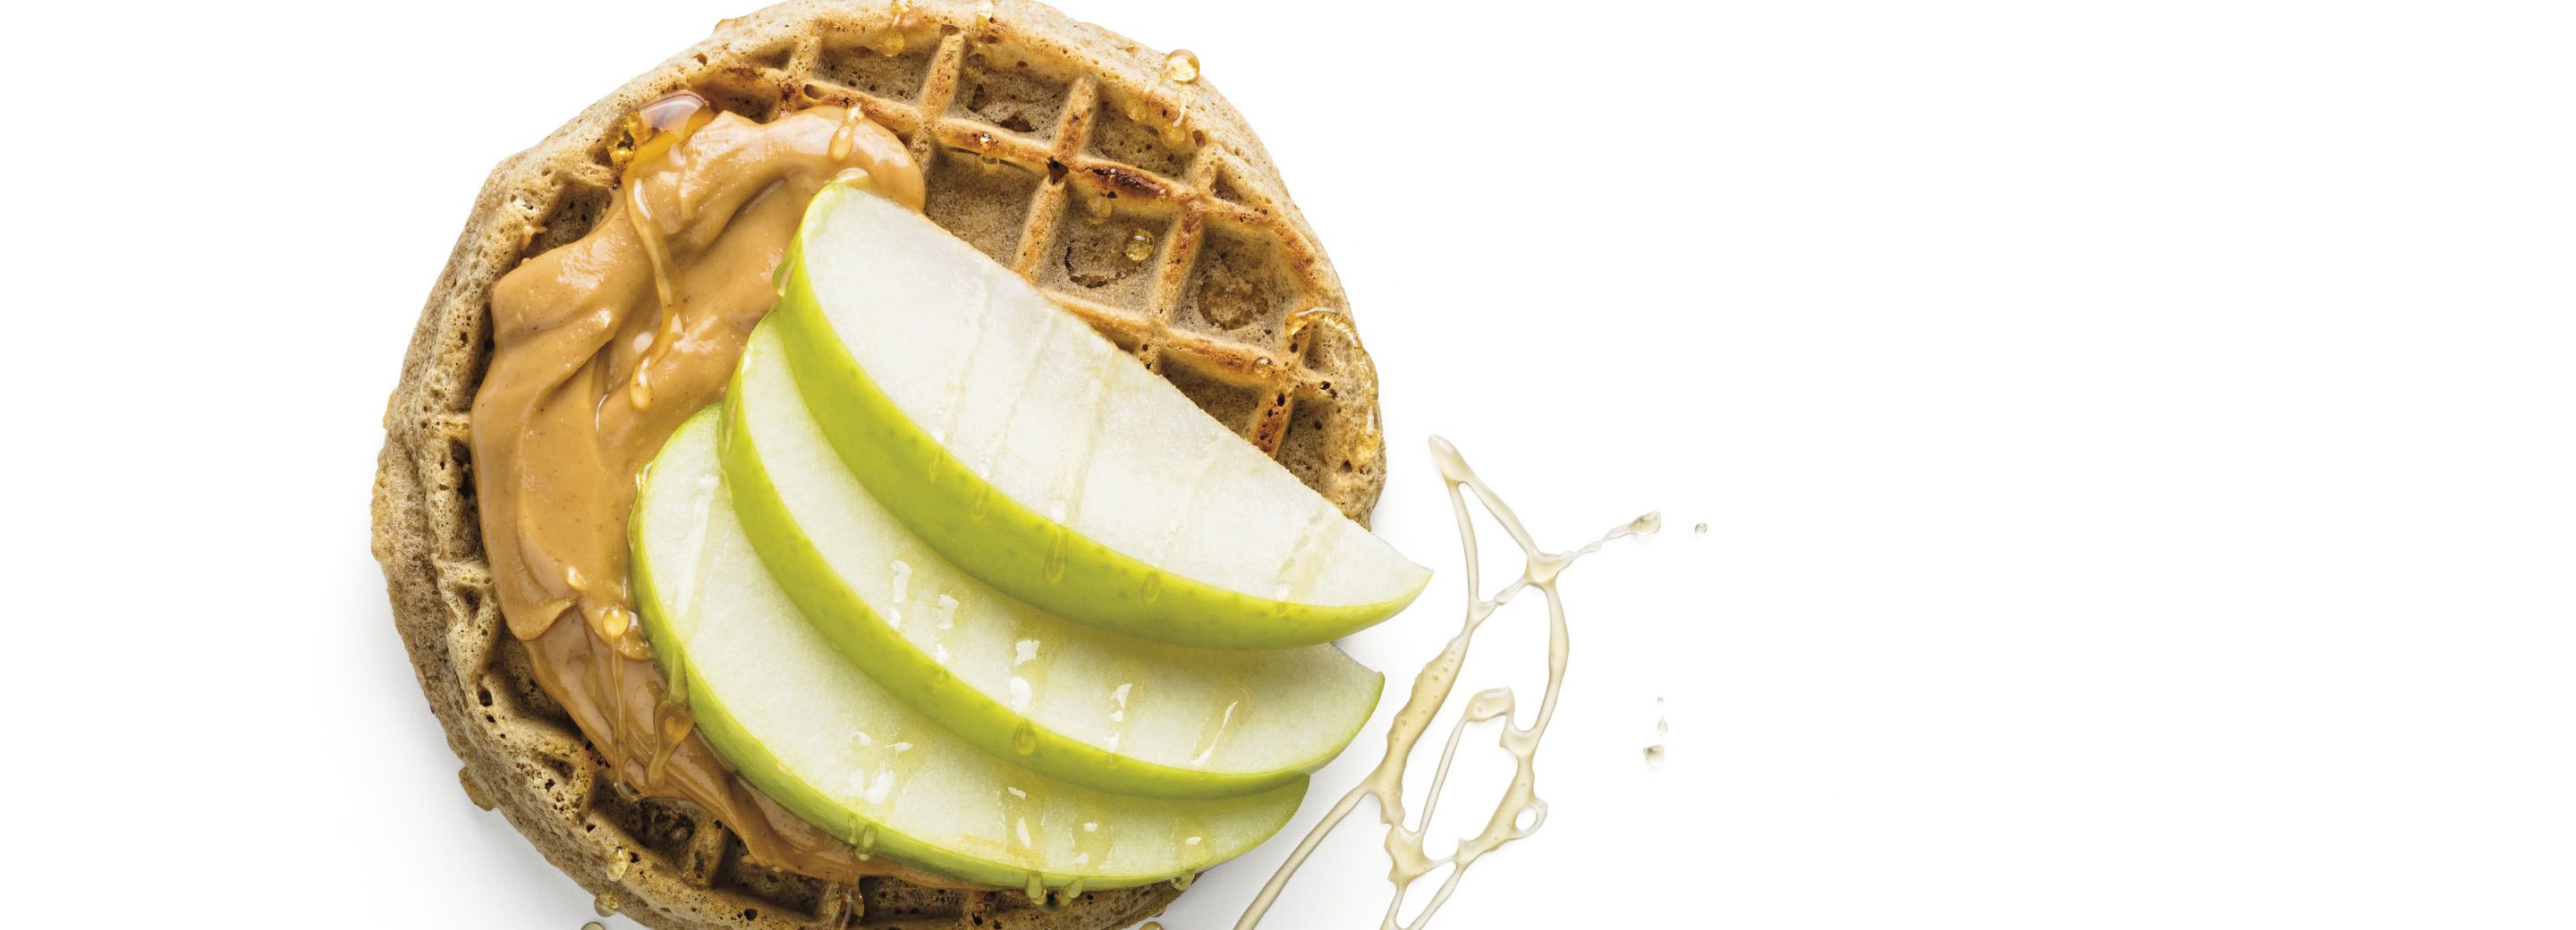 Apple and Peanut Butter Waffle